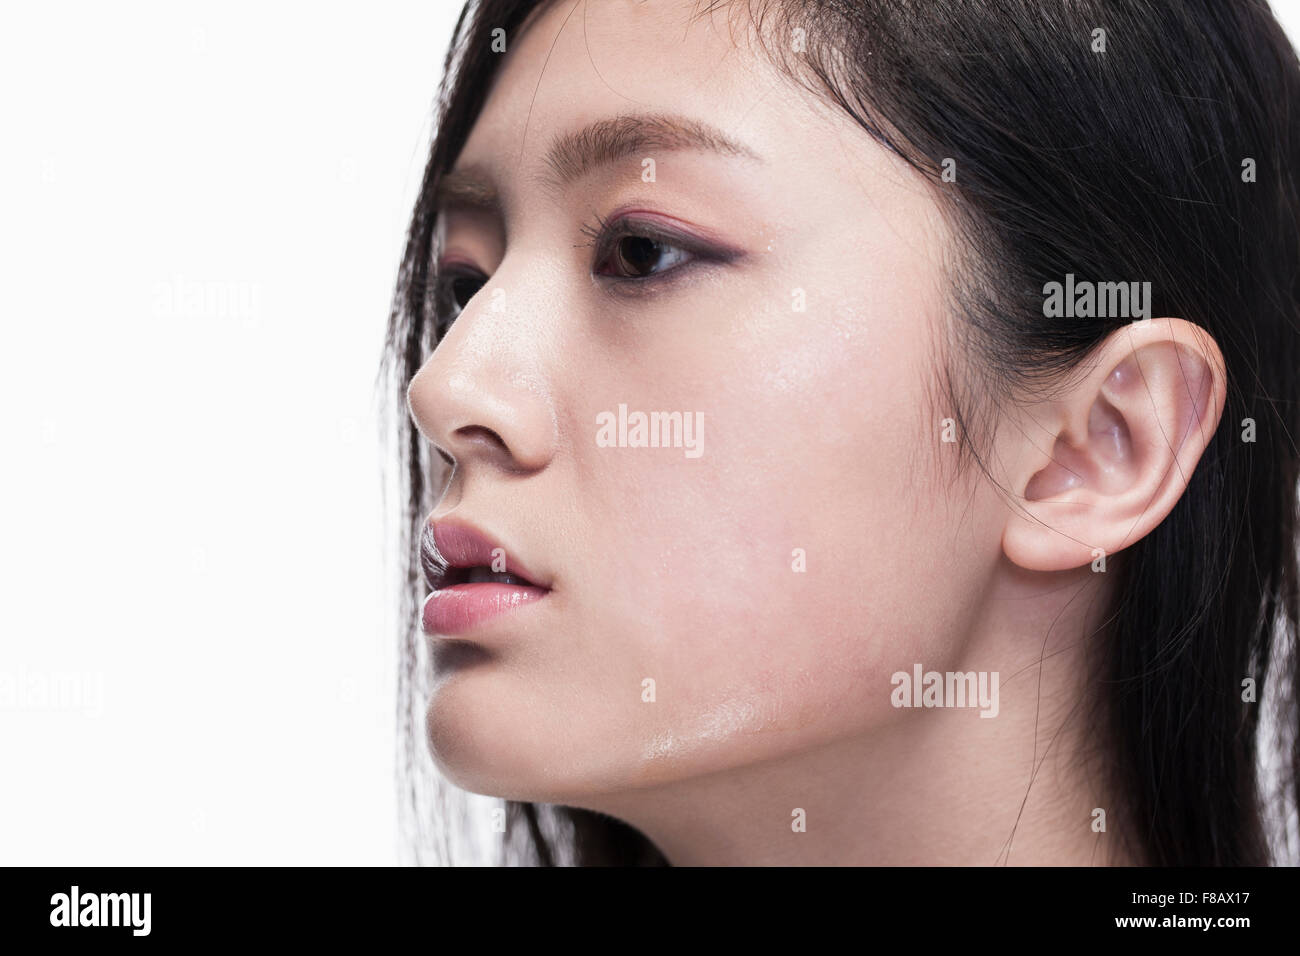 Side view face of young woman Stock Photo